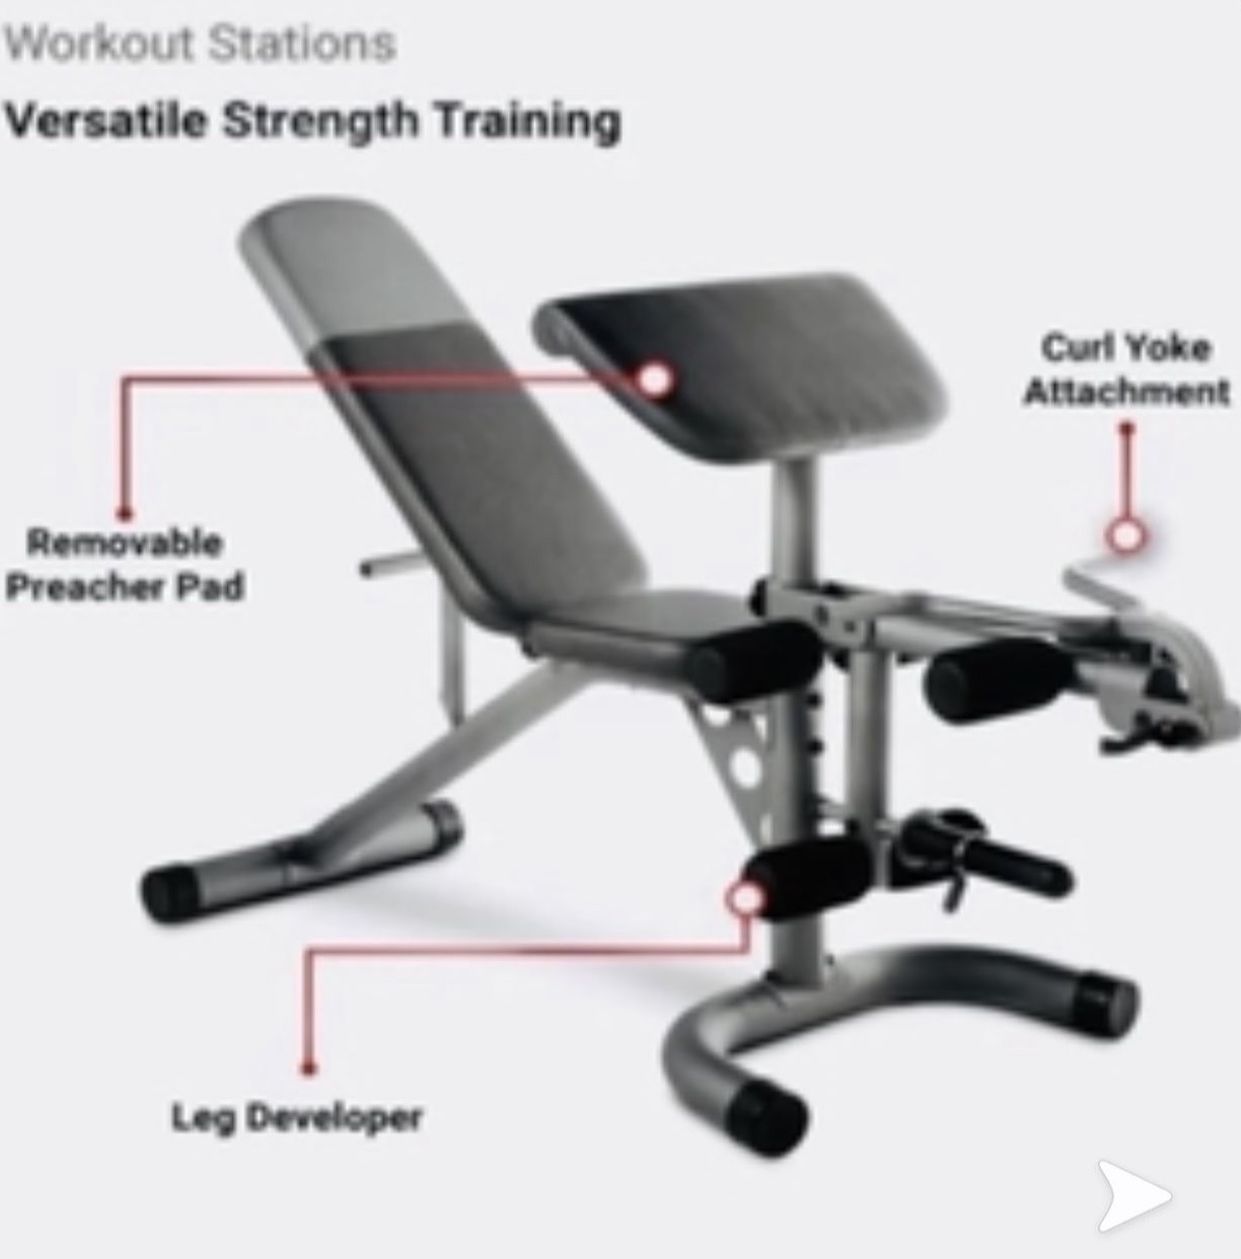 New Olympic Weight Bench With Leg Developer Curl Yoke And Preachers Perch